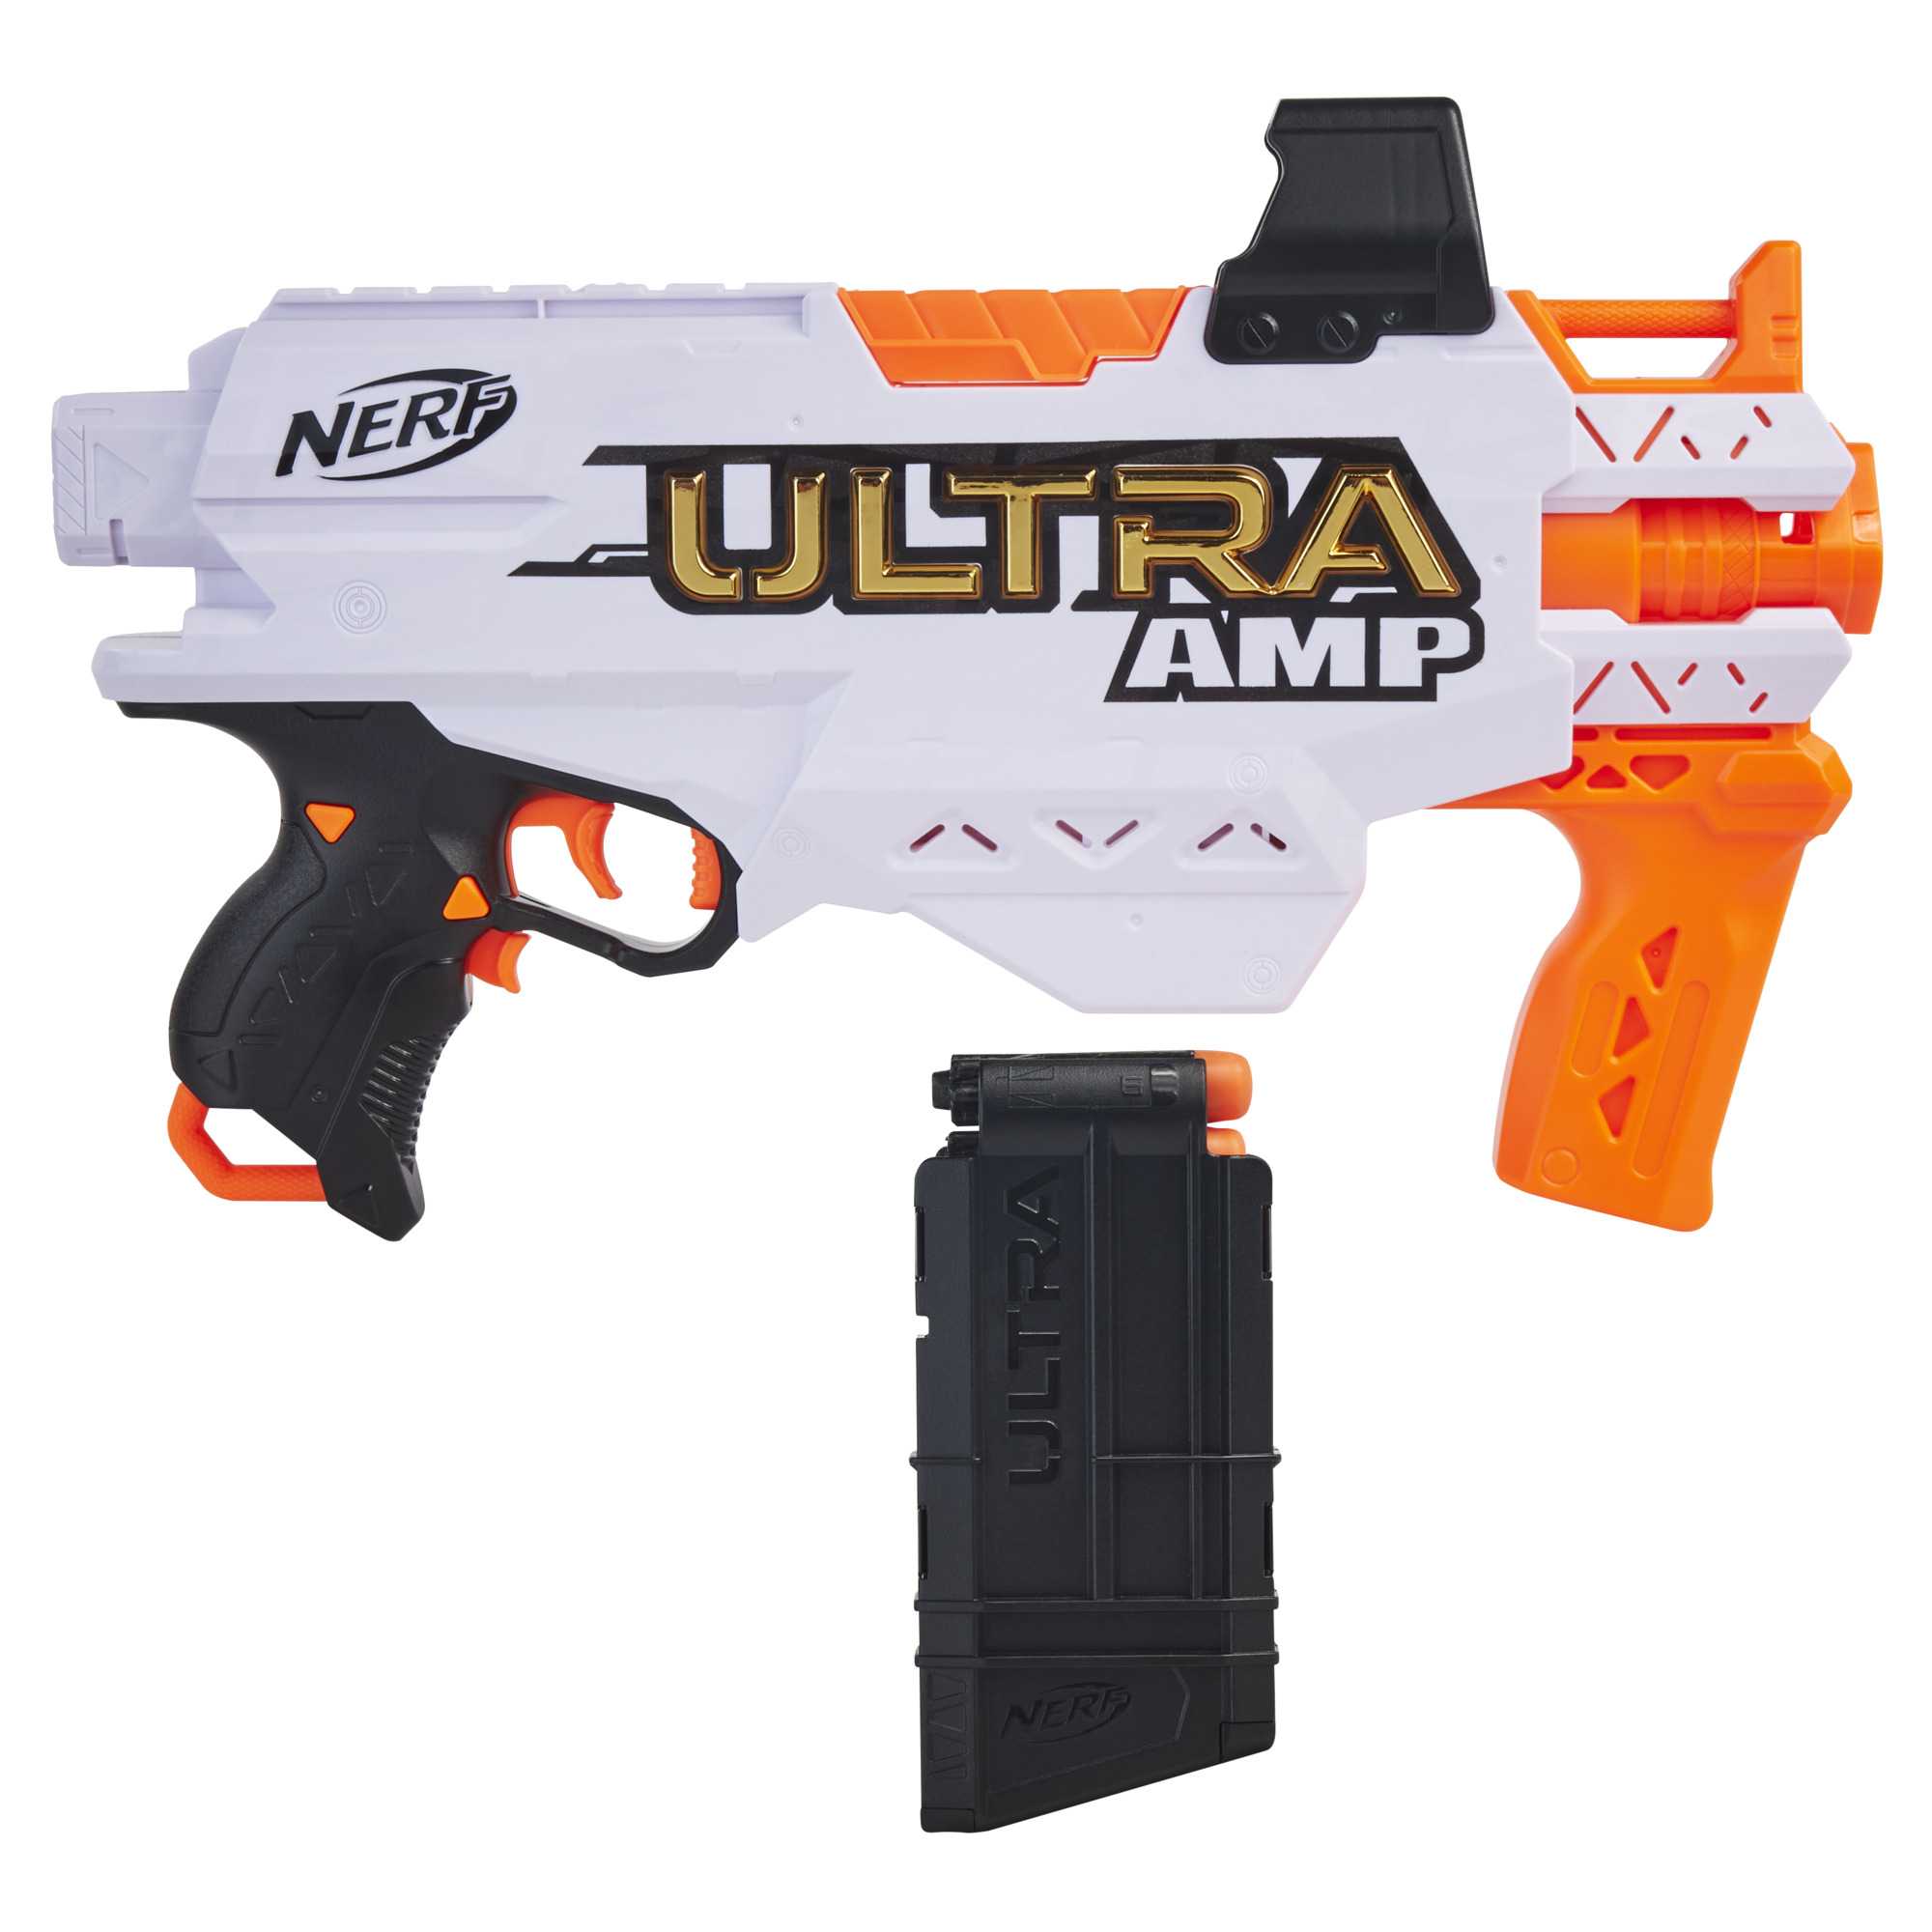 Nerf Ultra Amp Motorized Blaster, 6-Dart Clip, 6 Darts, Compatible Only with Nerf Ultra Darts - image 4 of 10